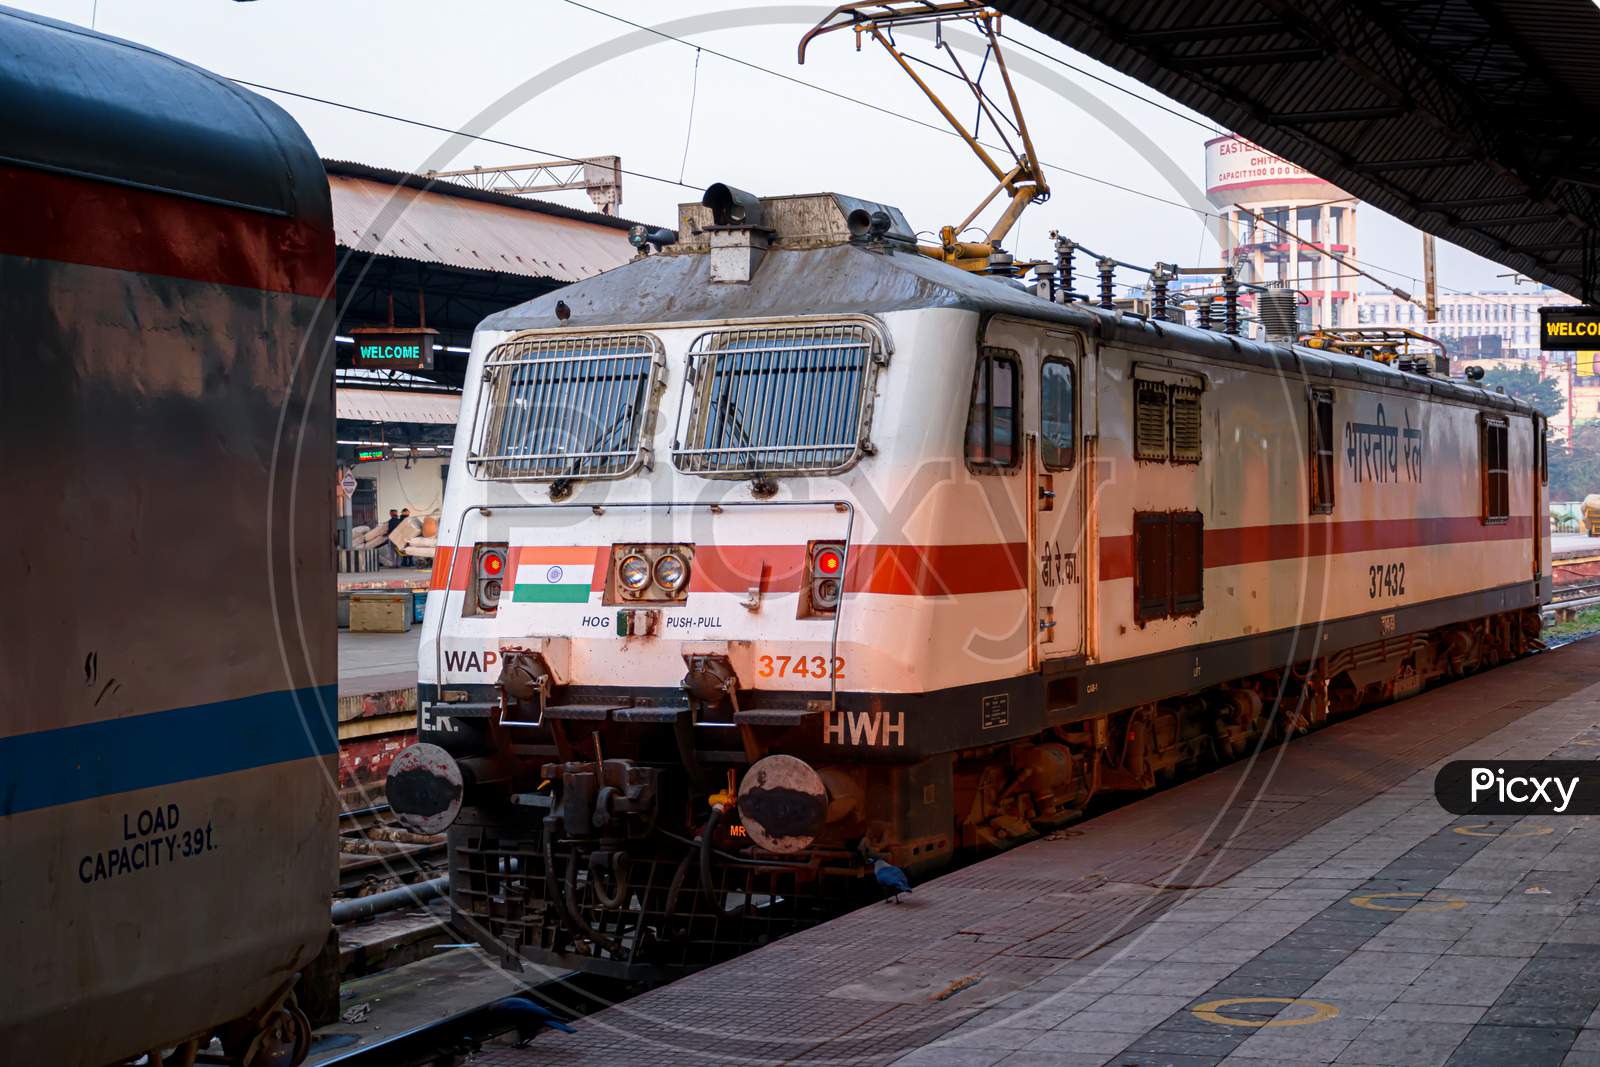 Picture Of A Locomotive Engine Is Wating For Connecting With A Passenger Train At A Junction Railway Station Of Indian Railways System. Kolkata, India On February 2021